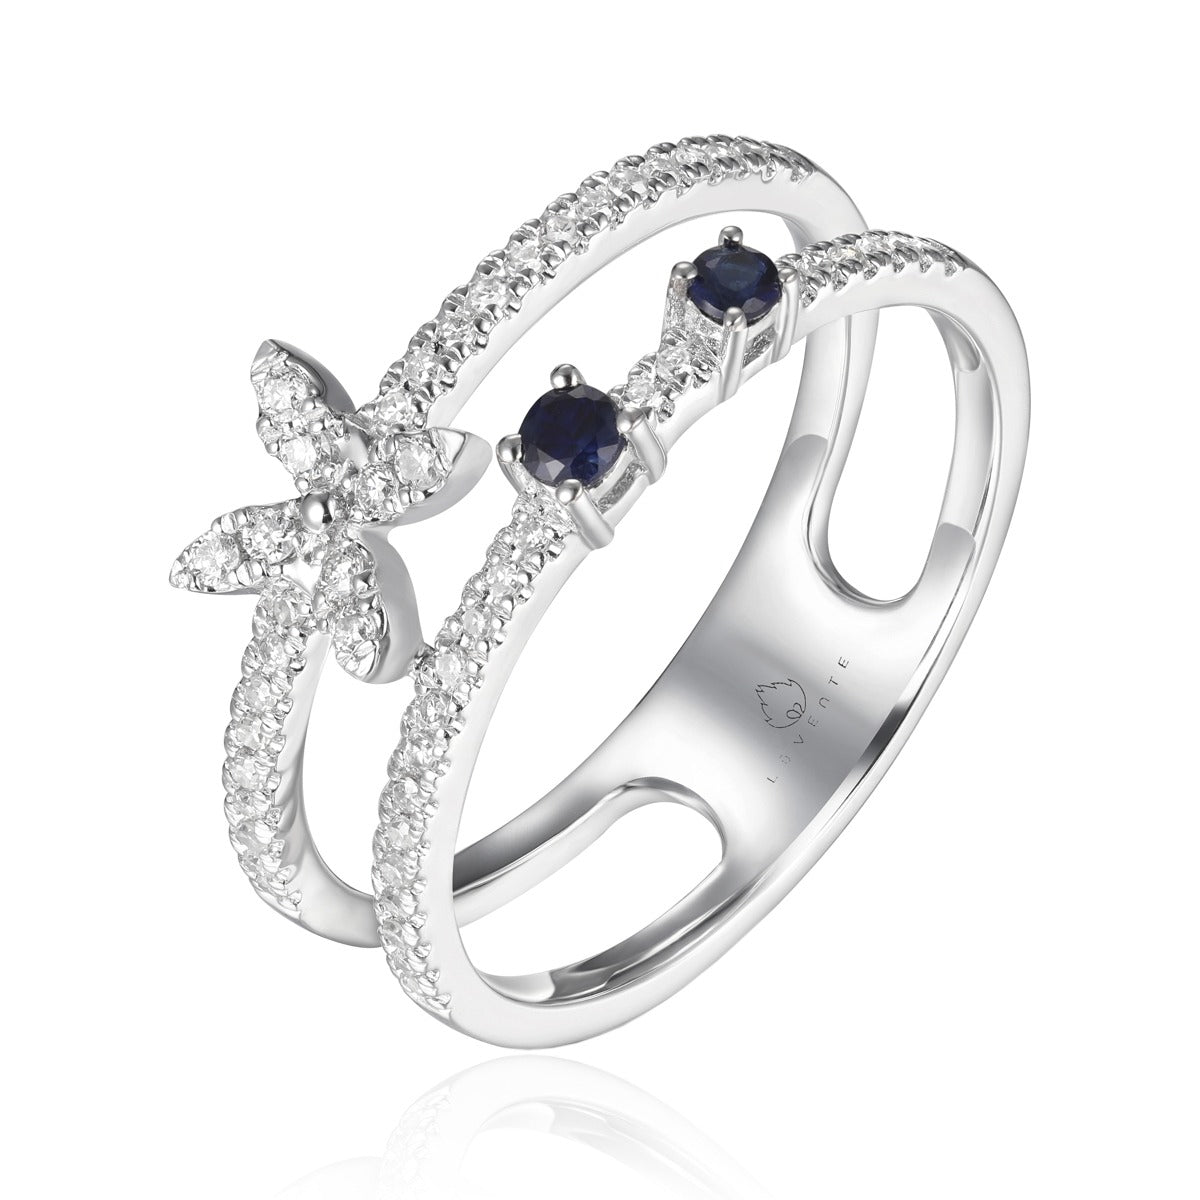 Luvente 14 Karat White Gold Two Row Diamond and Sapphire Ring - Colored Stone Rings - Women's